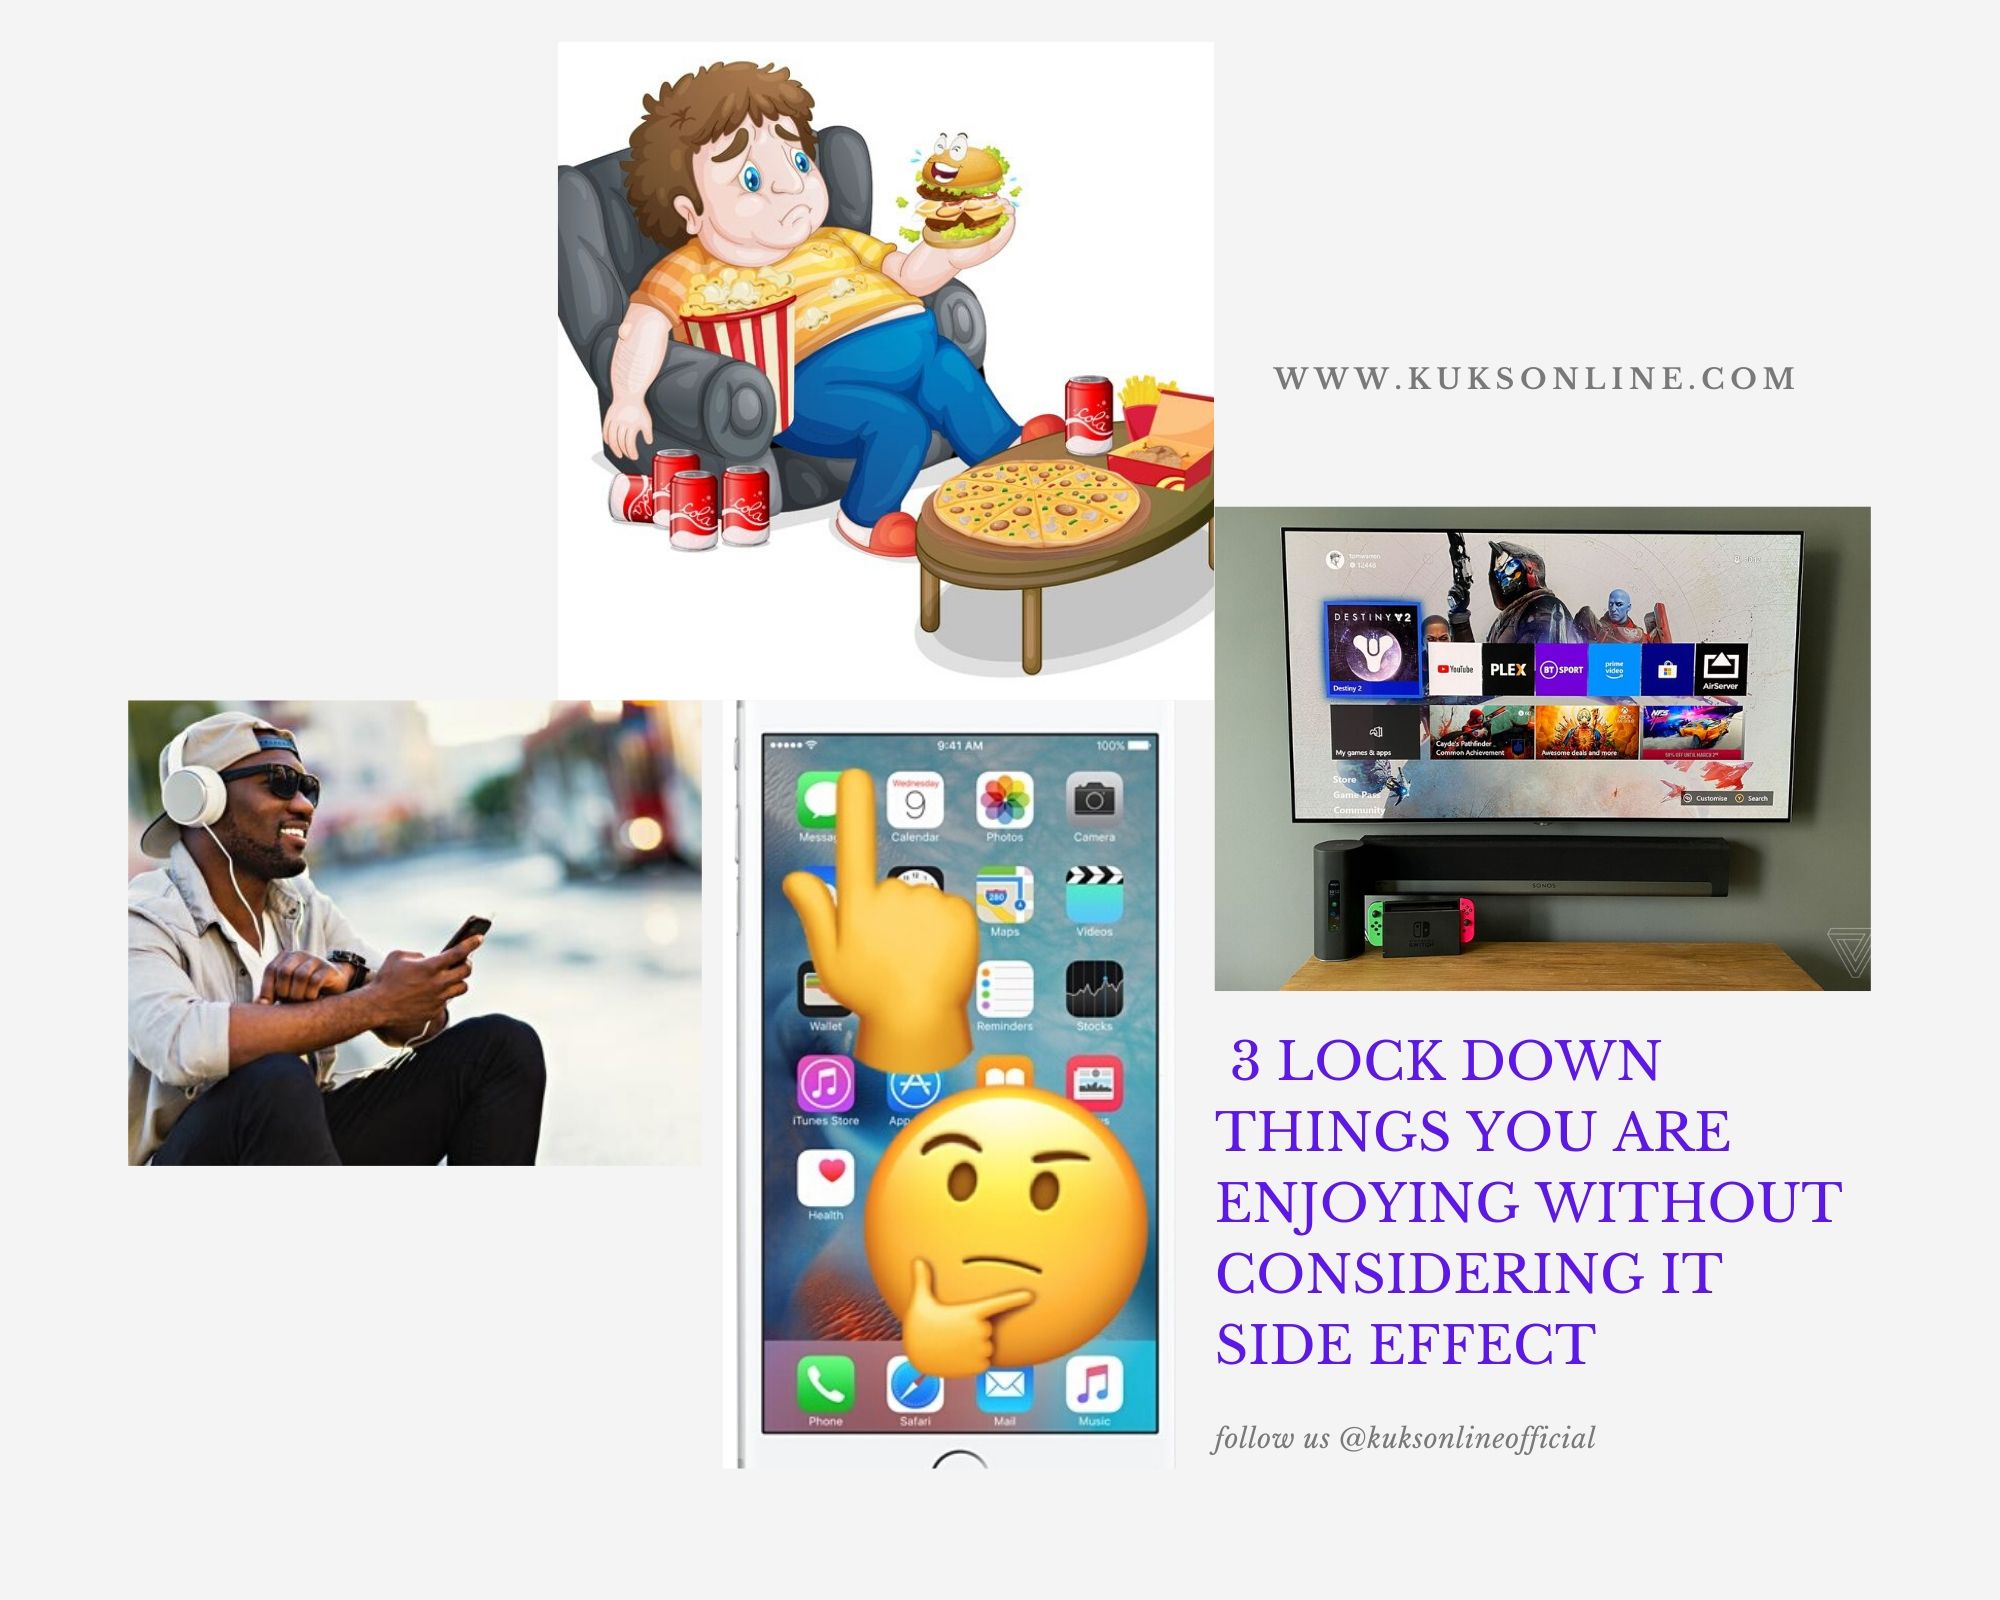 3 LOCKDOWN THINGS YOU ARE ENJOYING WITHOUT CONSIDERING IT SIDE EFFECT,in todays article i decided to draw people attention to the effect on some of the things like watching television,listenting to loud music and sitting for a long time can affect our health.